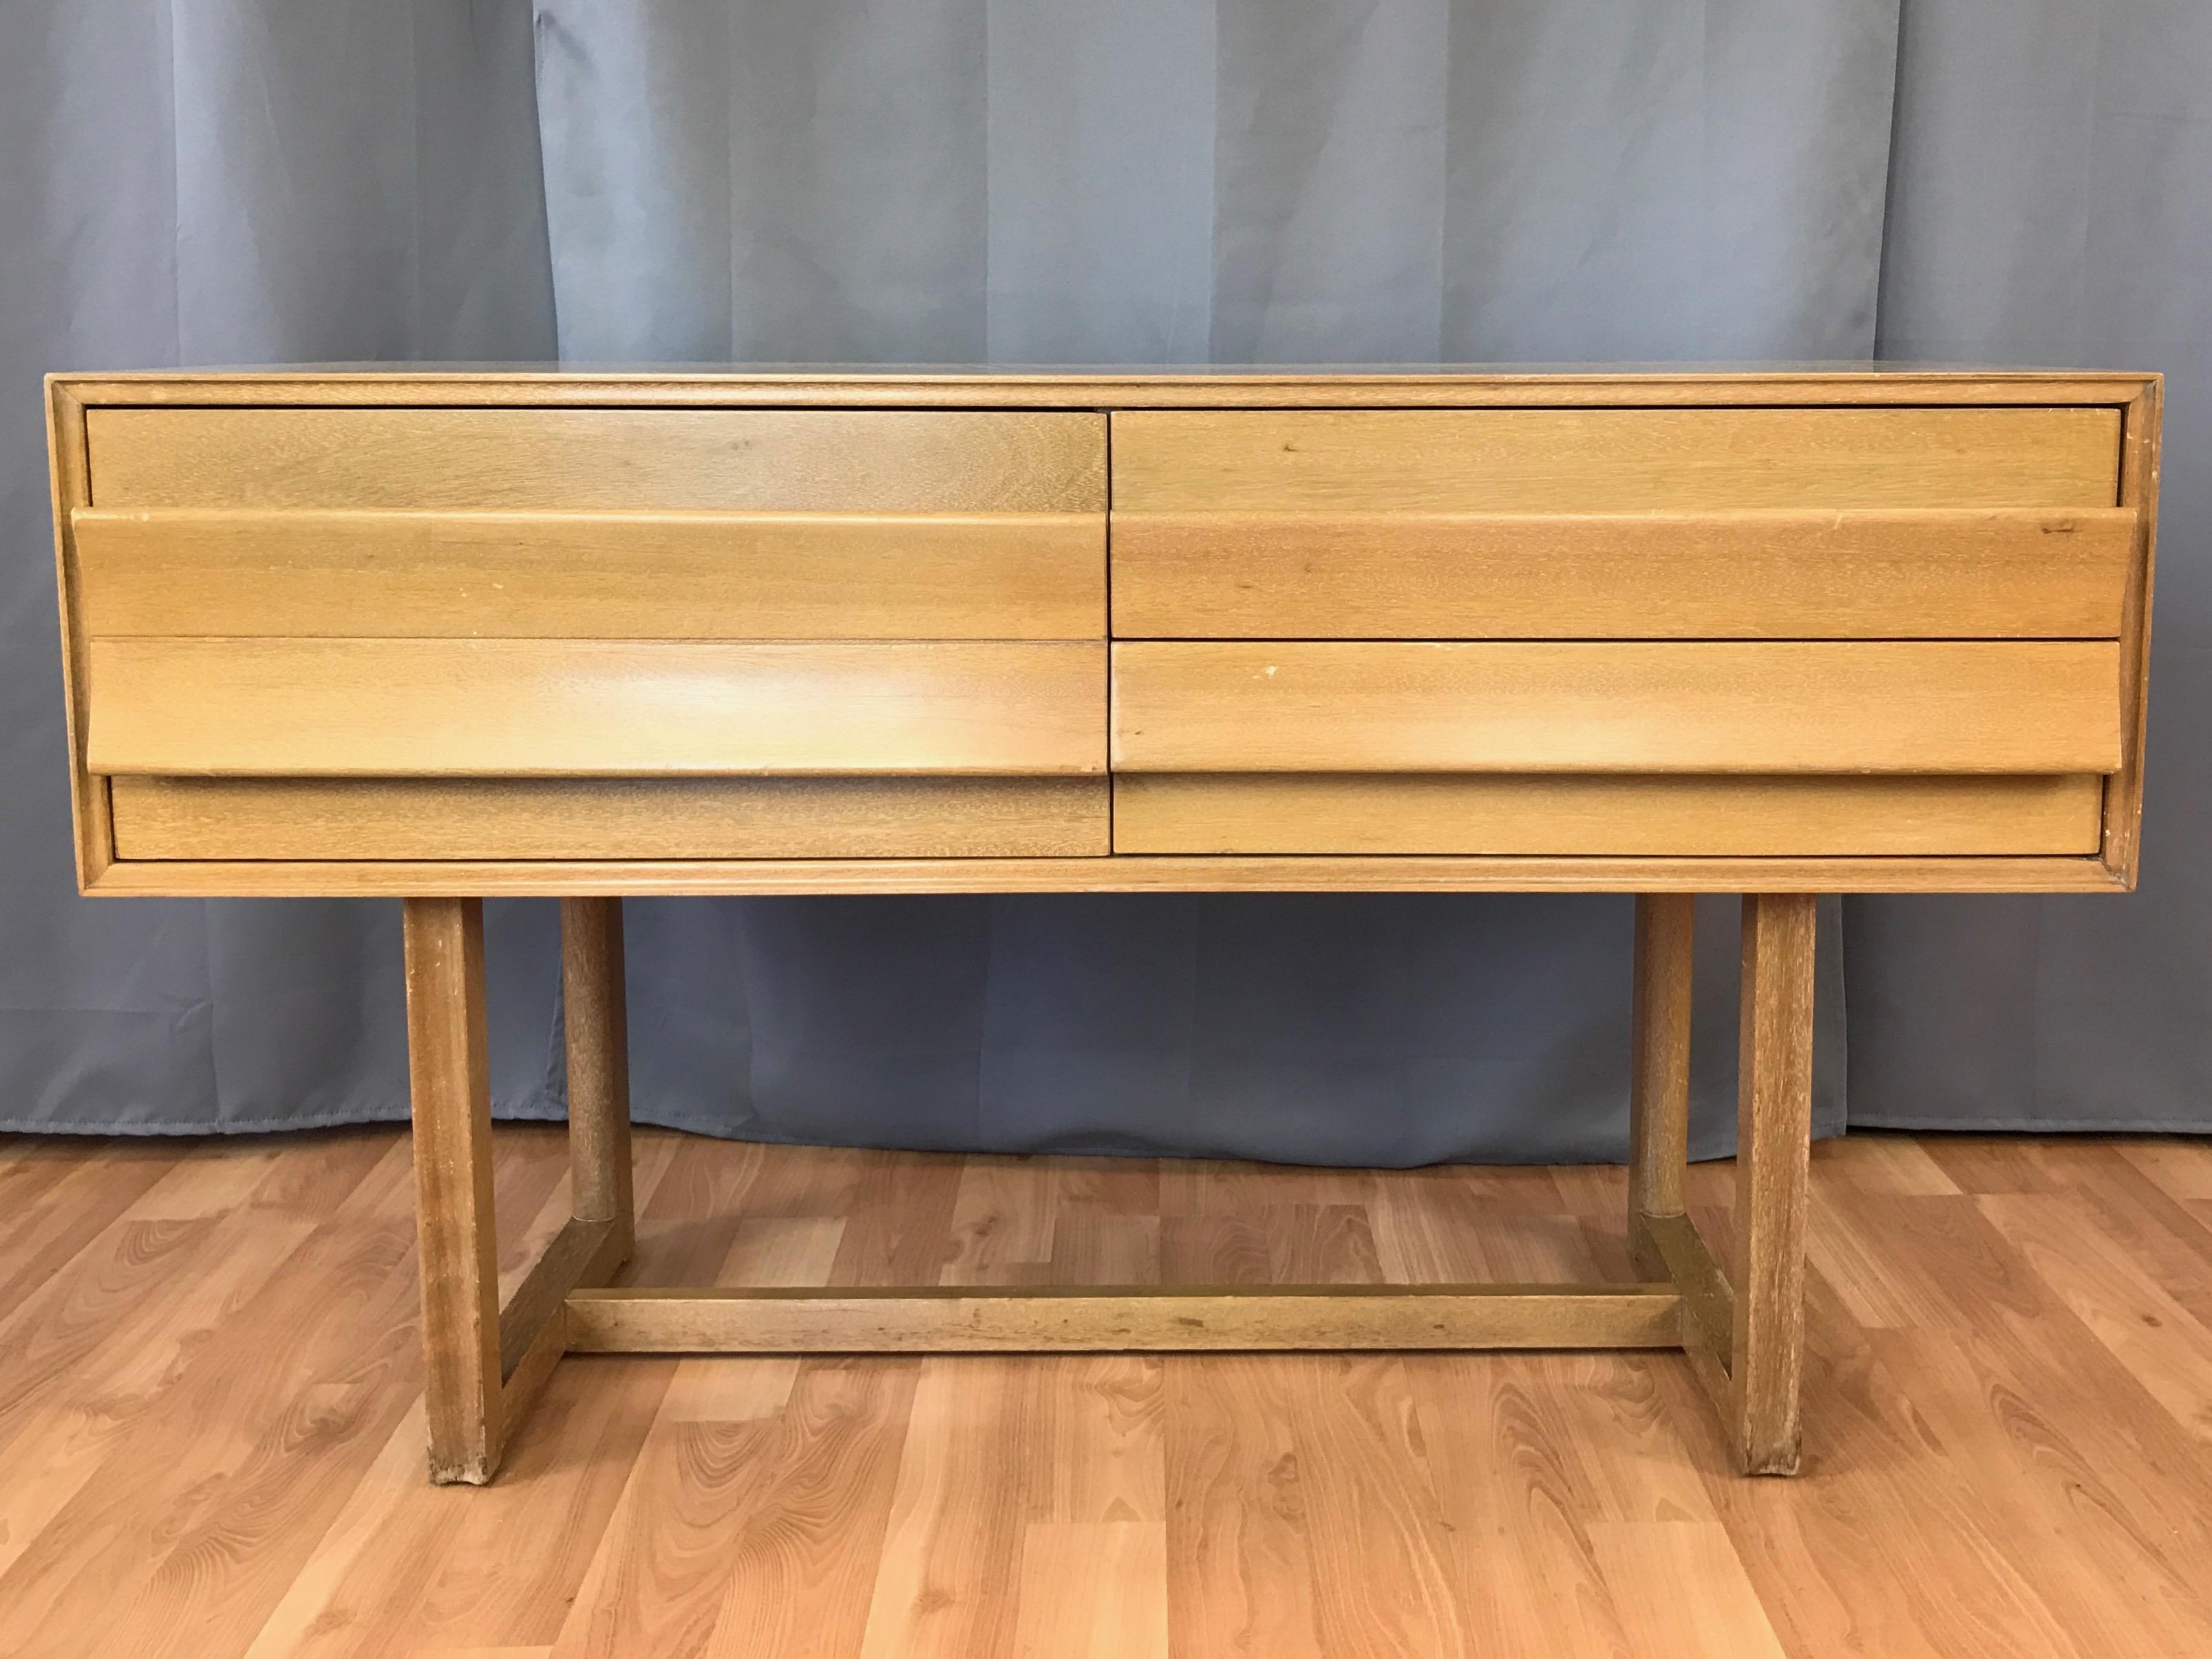 A 1950s mahogany four-drawer buffet or server by Paul Laszlo for Brown-Saltman.

A fairly uncommon piece, made even more so by it being finished in dynamic cerused bleached mahogany. Distinguished by wide drawers with full-front oversized curved